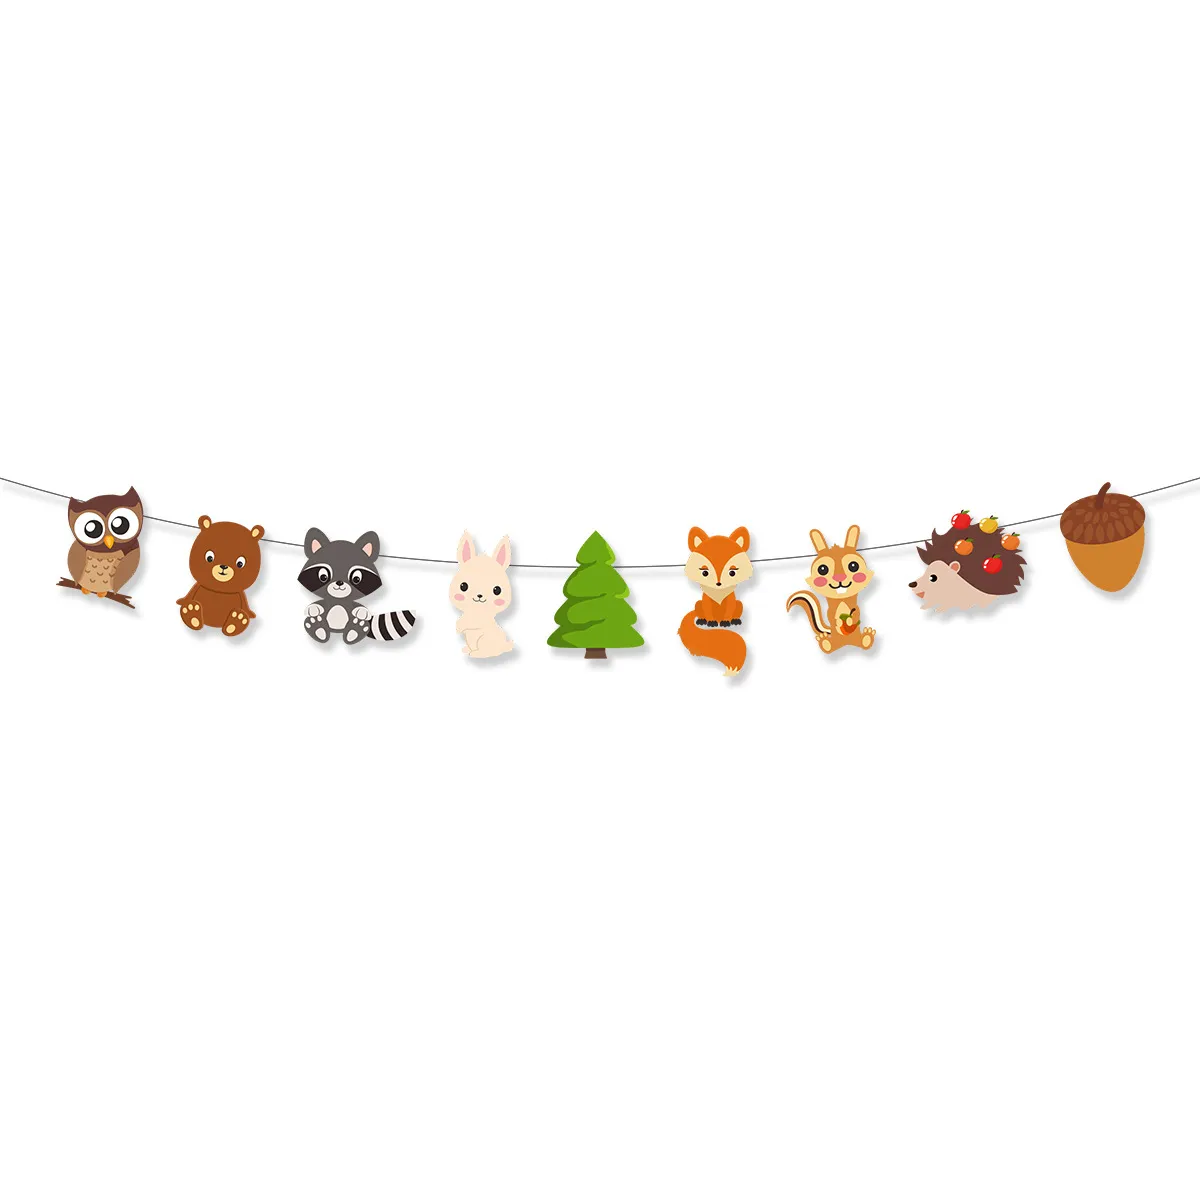 30 Pack Cartoon Fox Animal Restaurant Party Decorations Perfect For  Birthdays, Baby Showers, And Home Decoration From Wuxiaojing, $15.01